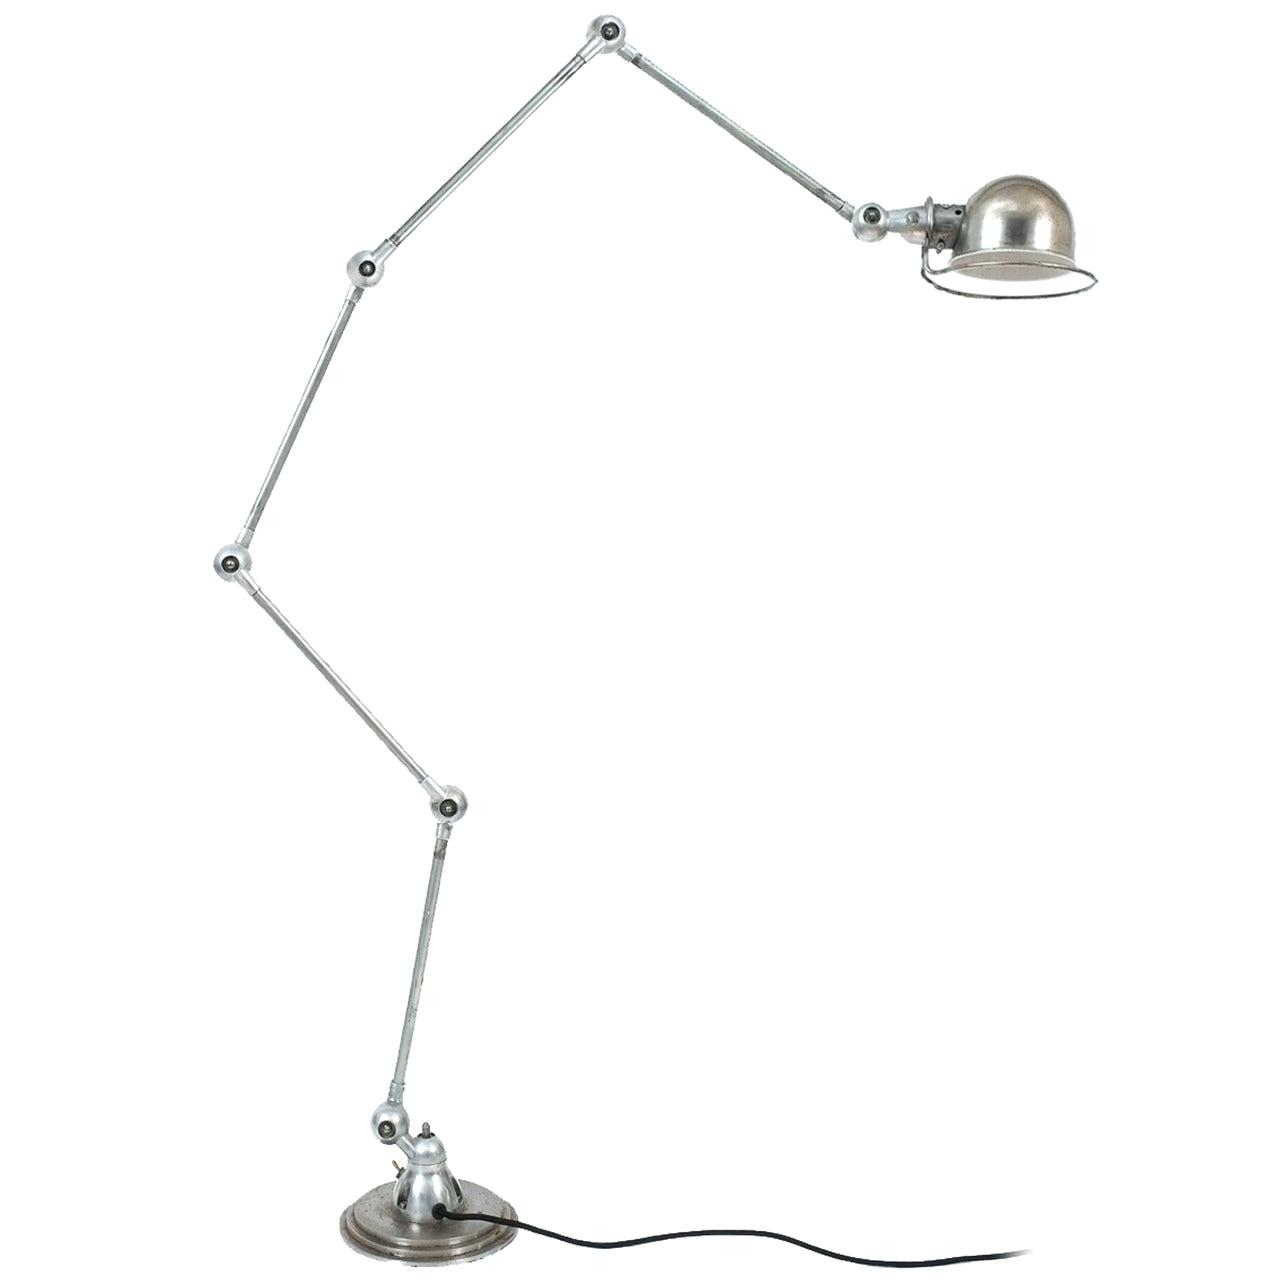 Jielde Floor Lamp Style Jean For 2 Arm Diversphotoclub pertaining to sizing 1280 X 1280